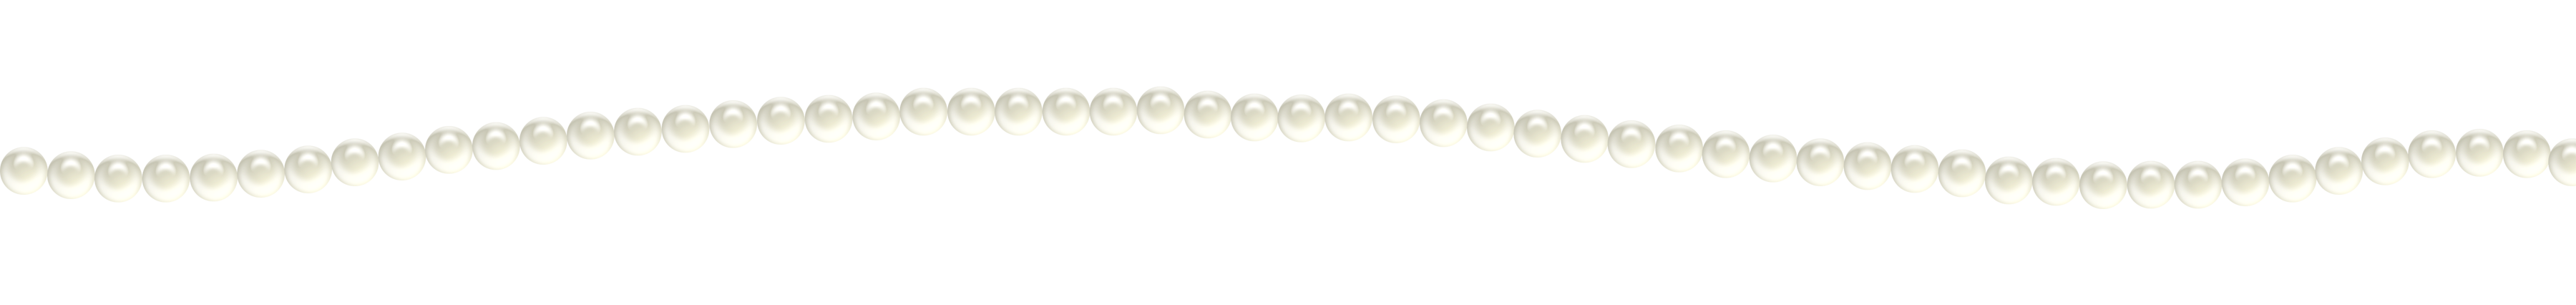 Pearls clipart border. Png images free download